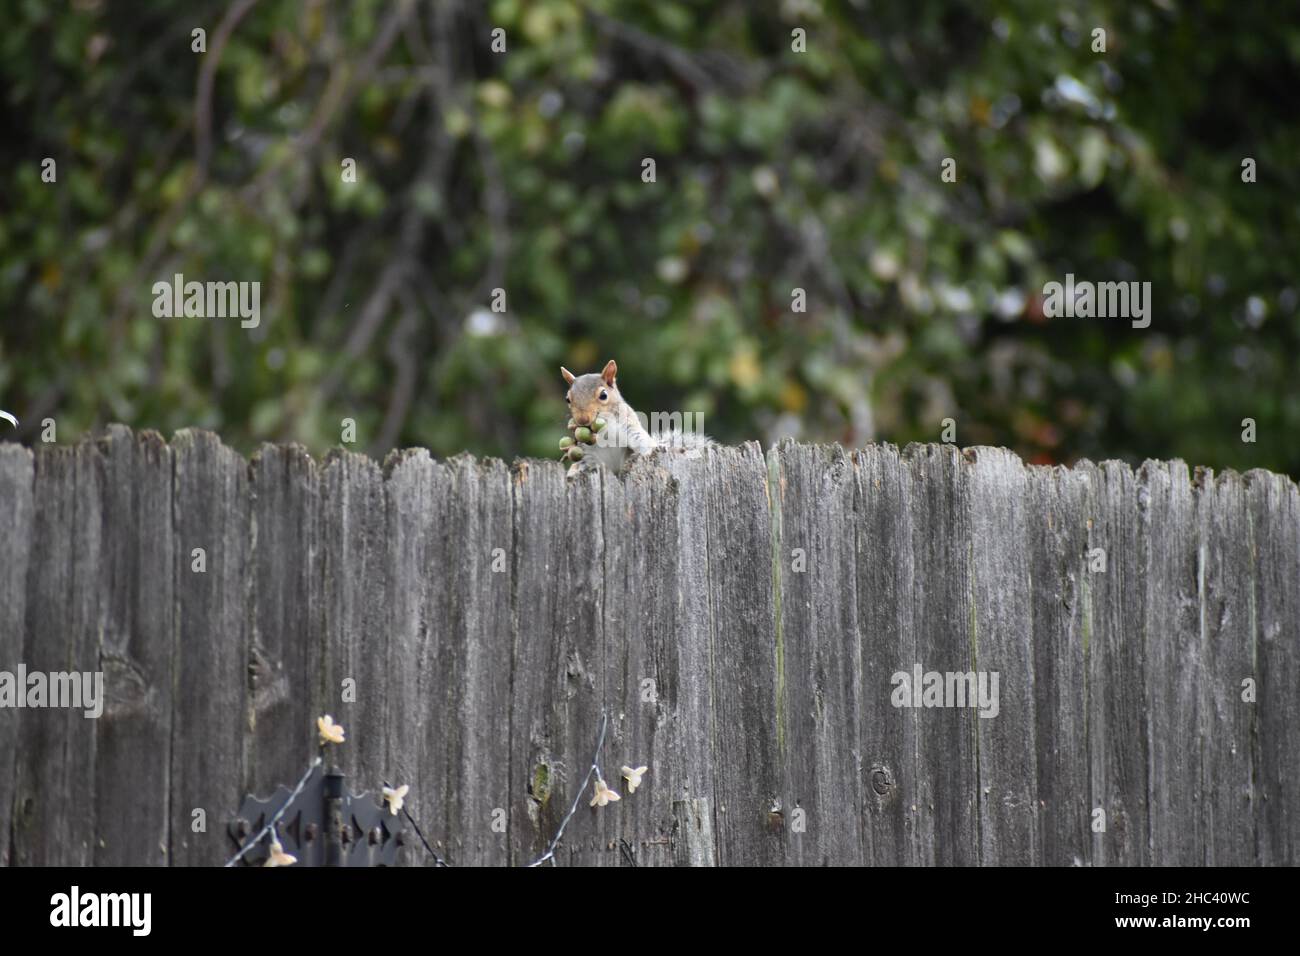 Cute little furry Chipmunks looking behind the wooden fence Stock Photo